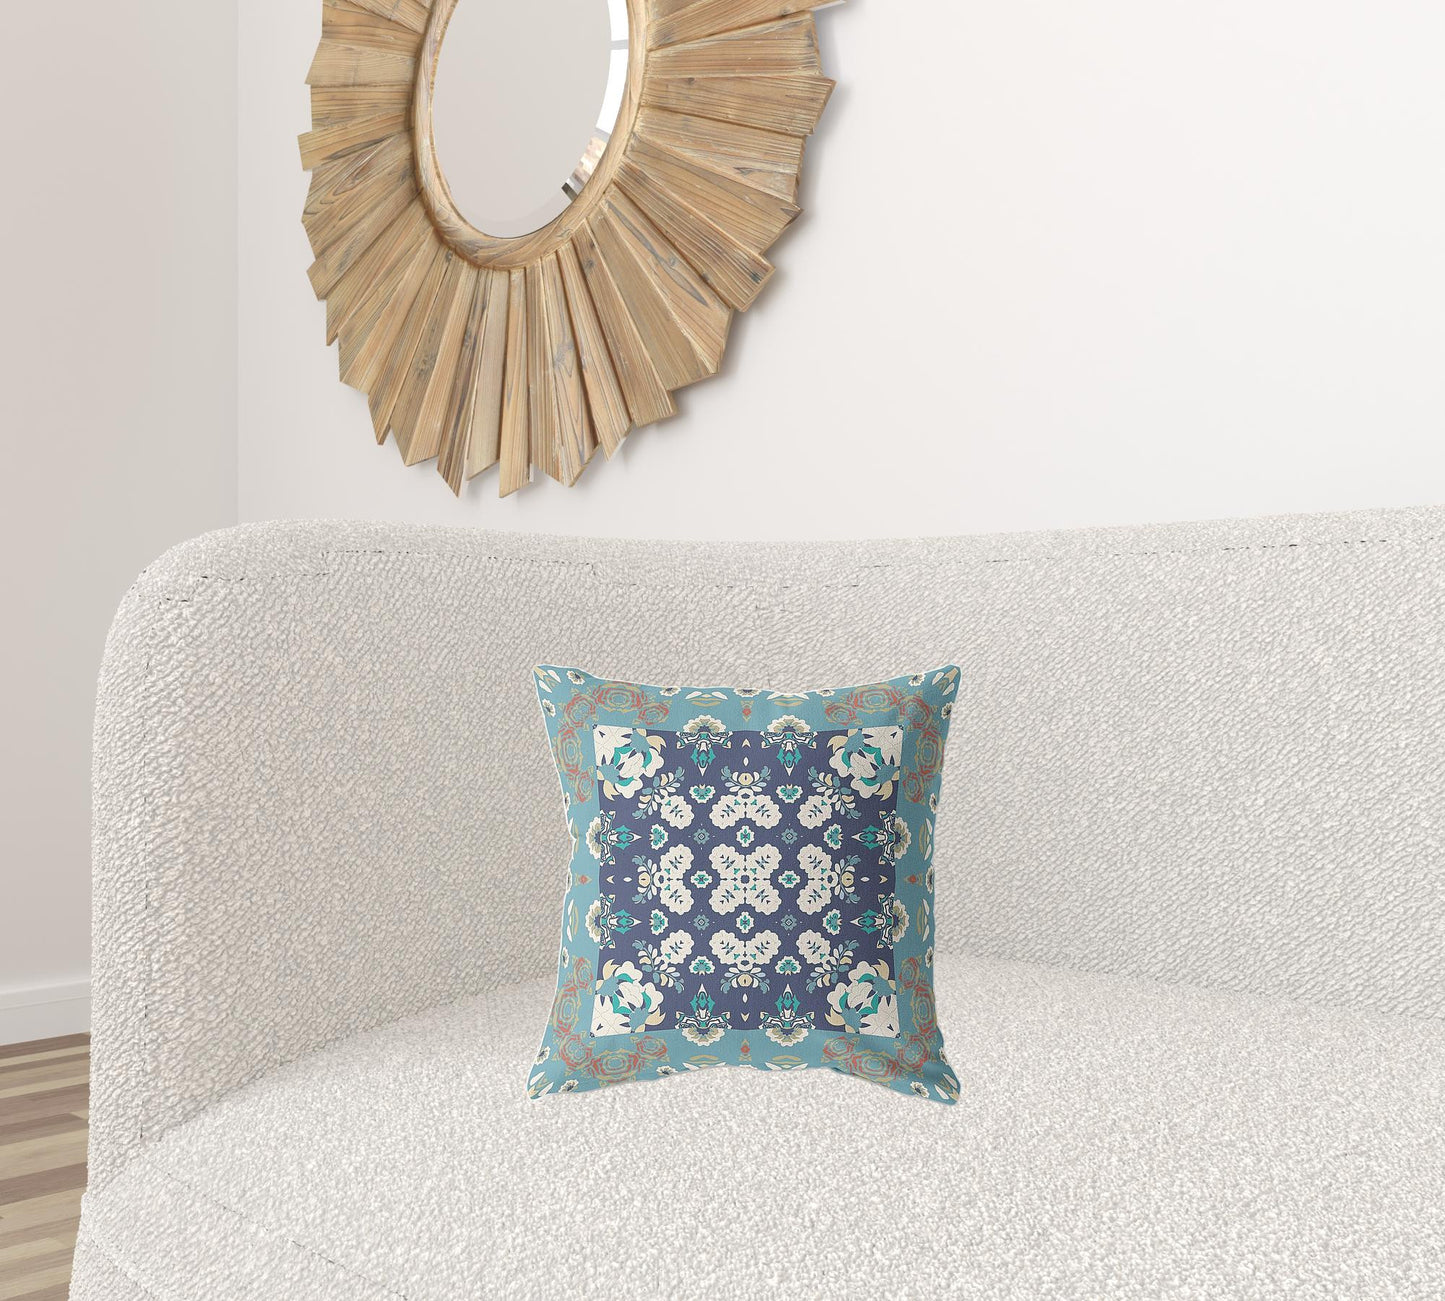 16" X 16" Gray And Blue Broadcloth Floral Throw Pillow